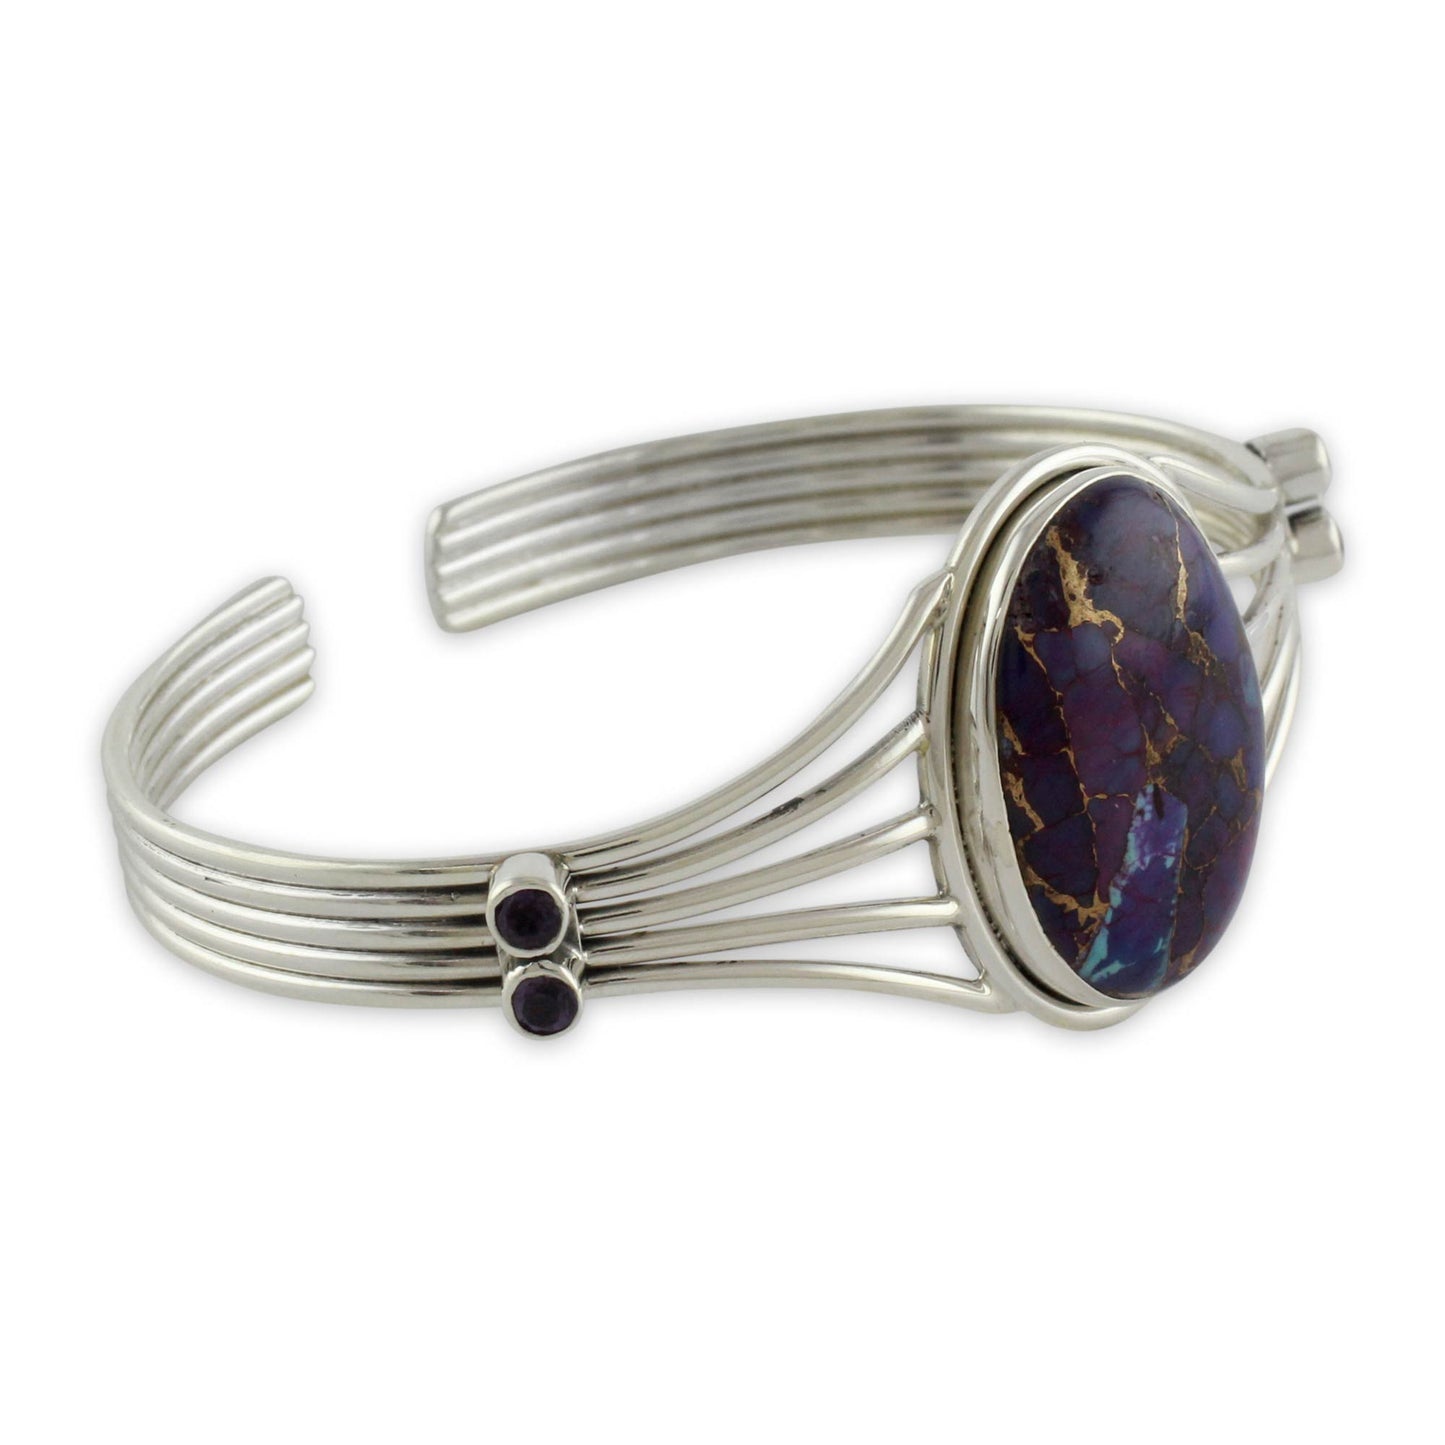 Violet Island Amethyst and Composite Turquoise Silver Cuff Bracelet